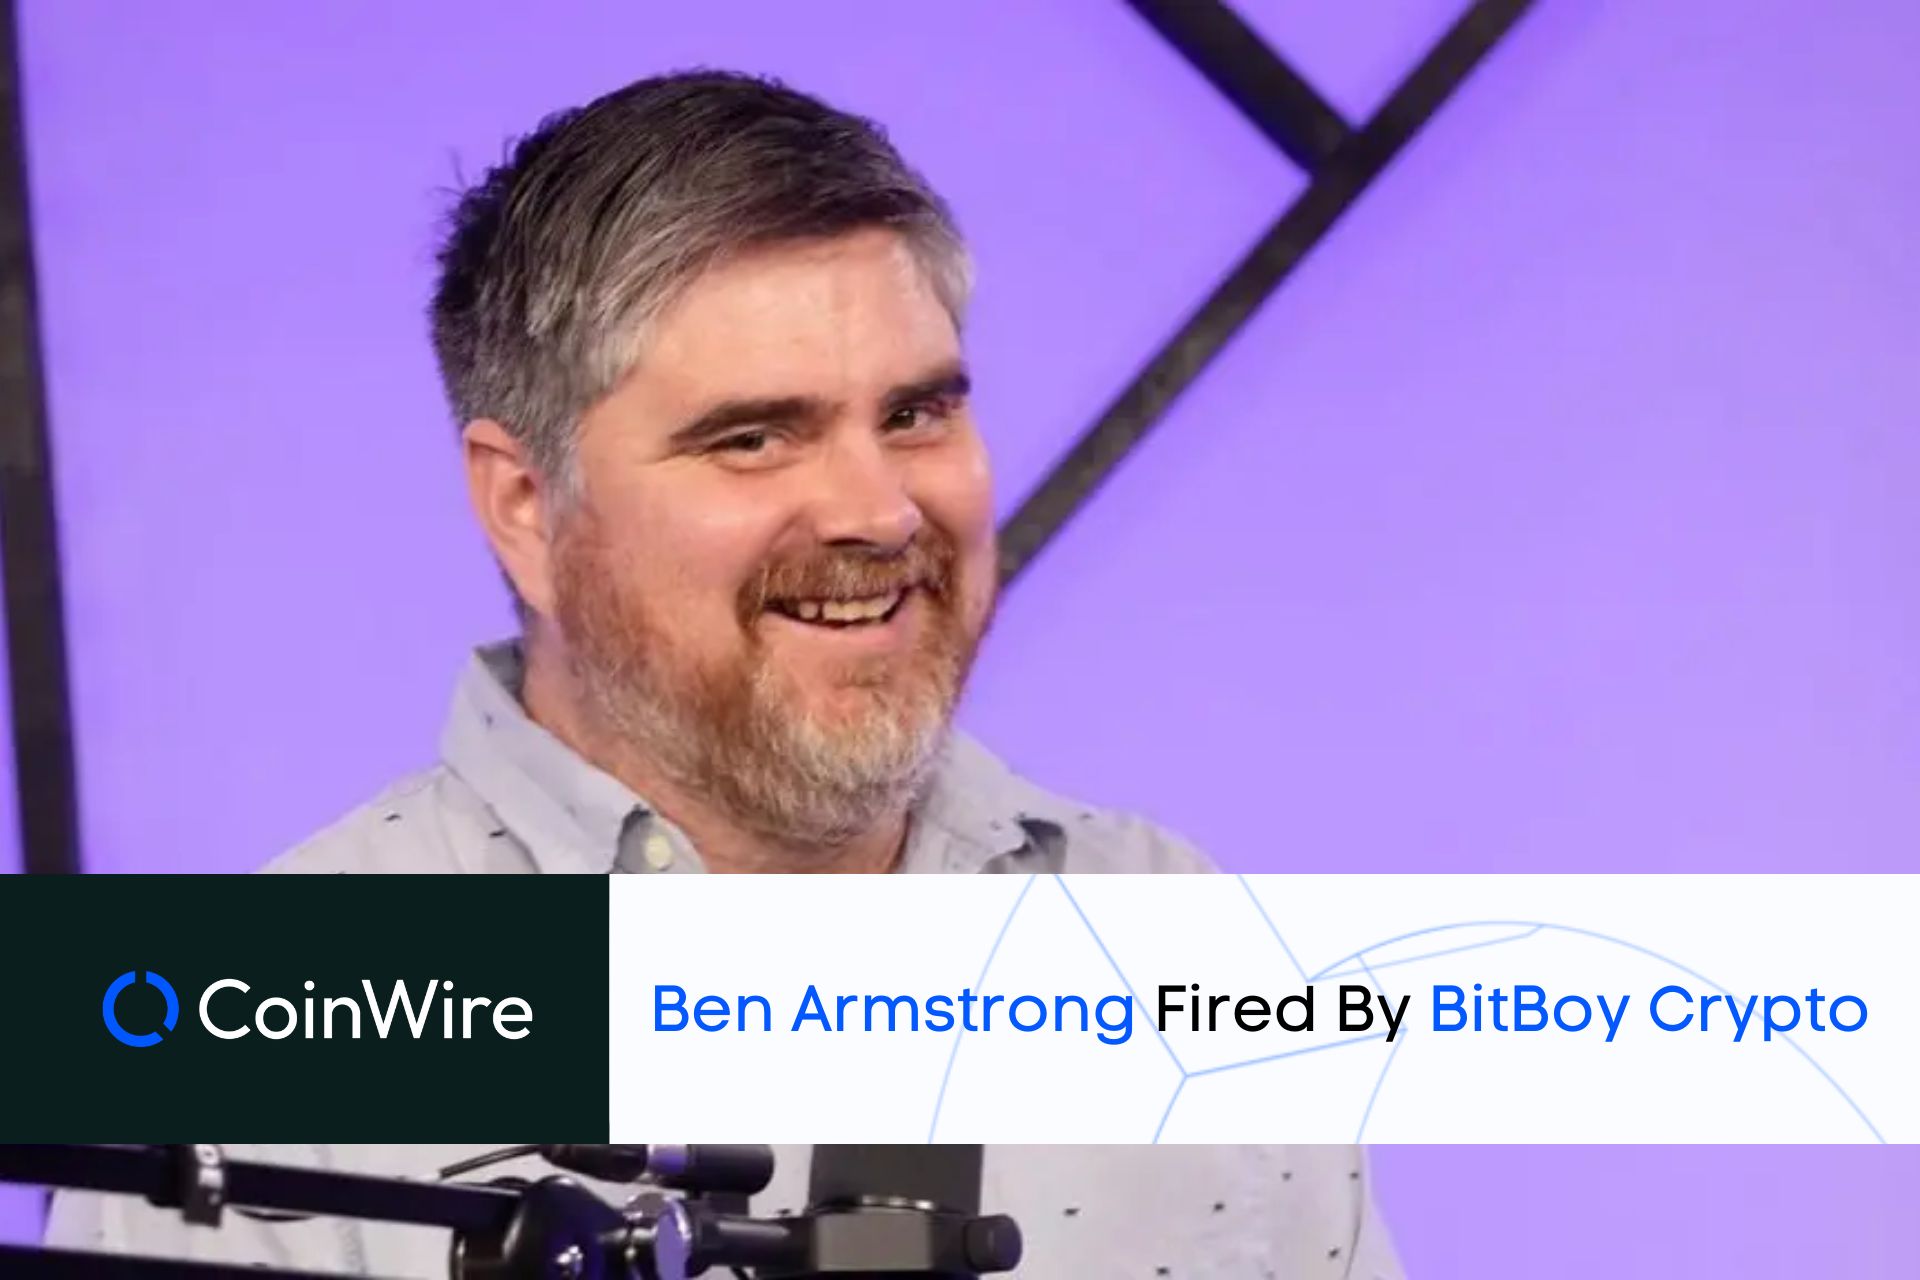 Ben Armstrong Fired By Bitboy Crypto